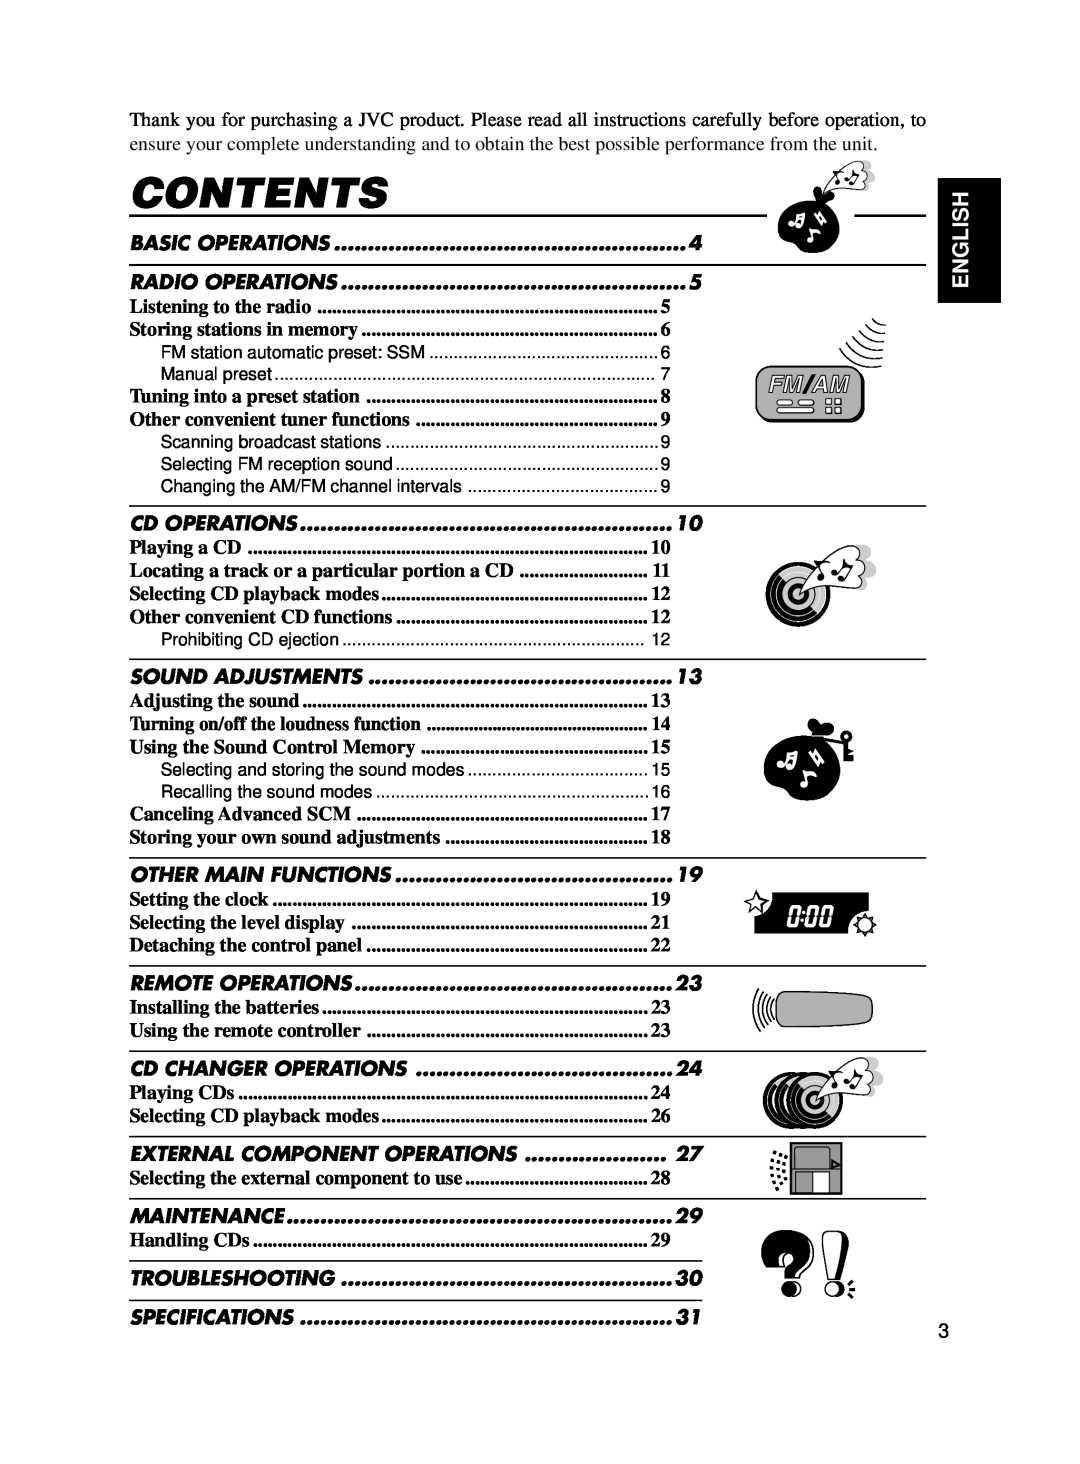 JVC KD-SX650 manual Contents, English, Playing a CD, Locating a track or a particular portion a CD 